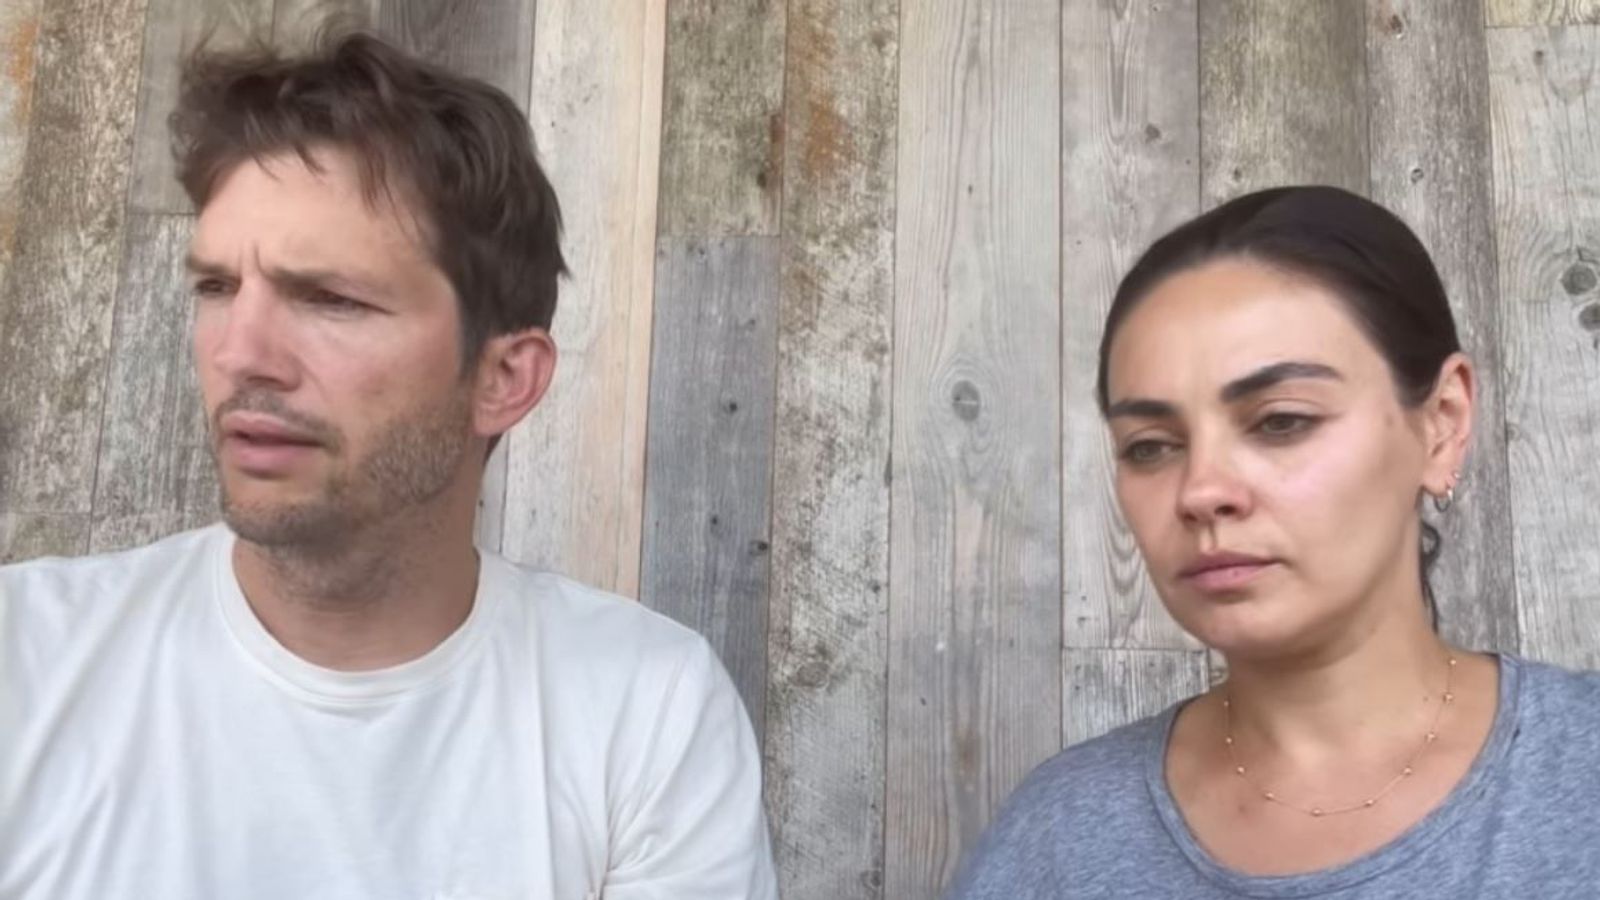 'We're sorry': Ashton Kutcher and Mila Kunis explain why they asked judge for leniency in case of rapist co-star